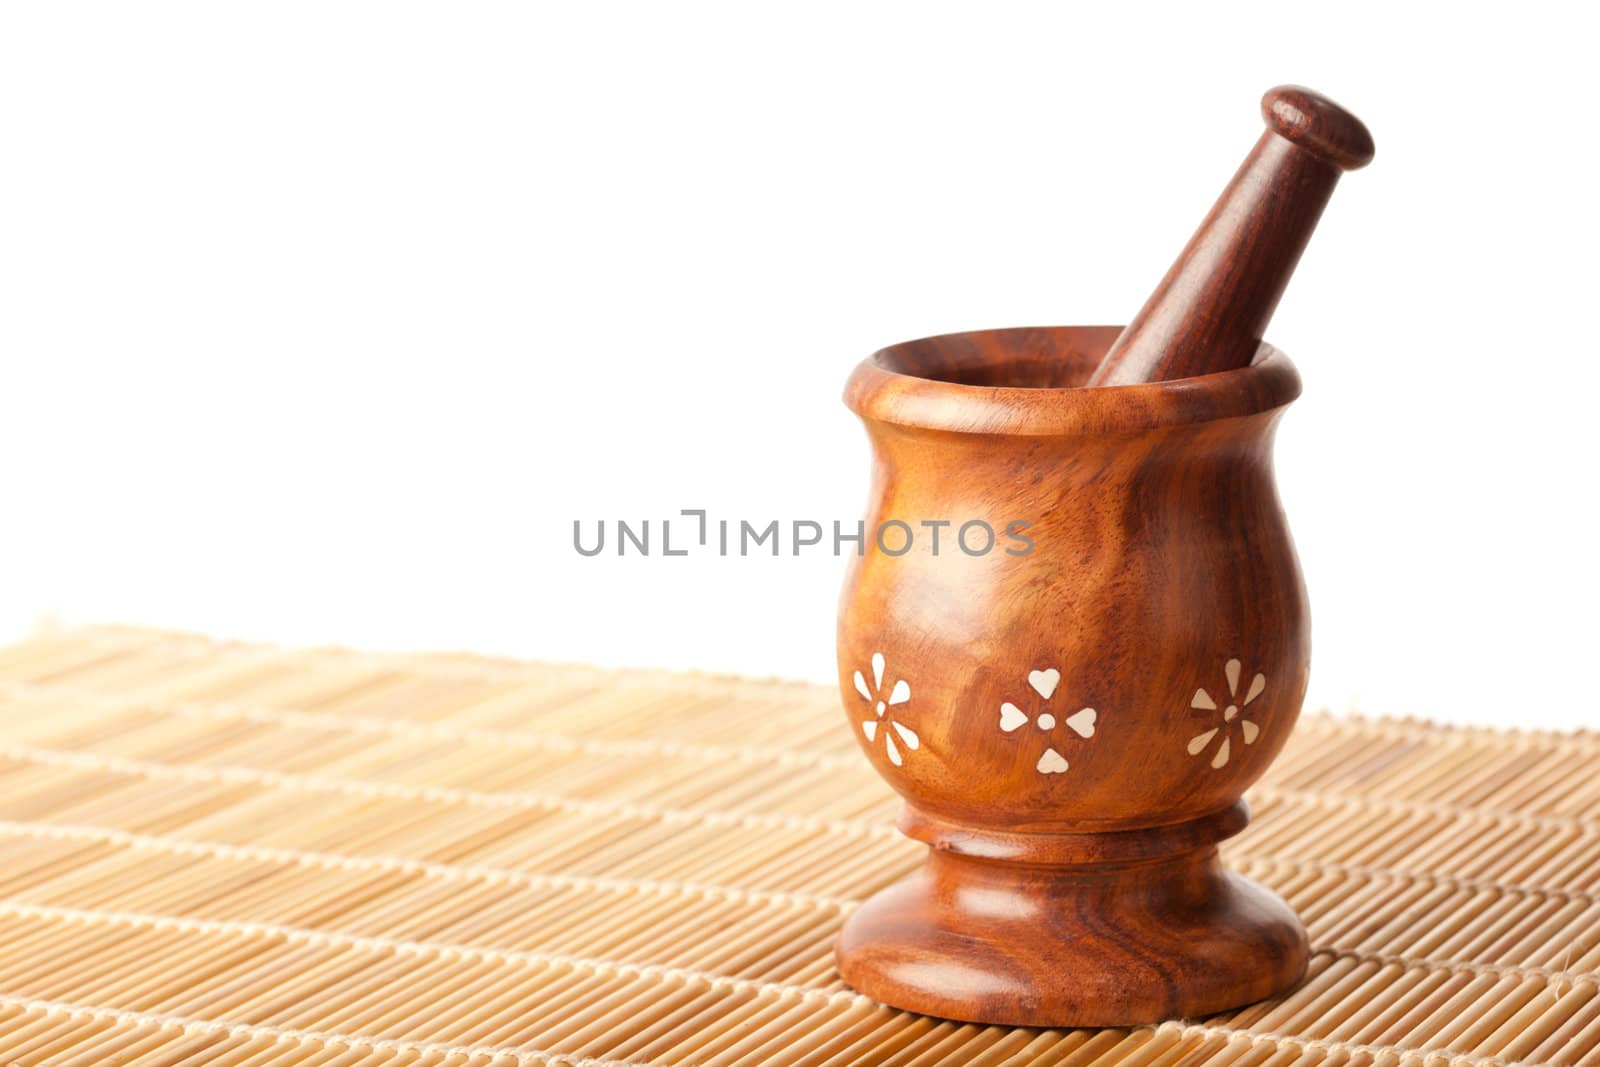 Wooden mortar with pestle by dimol